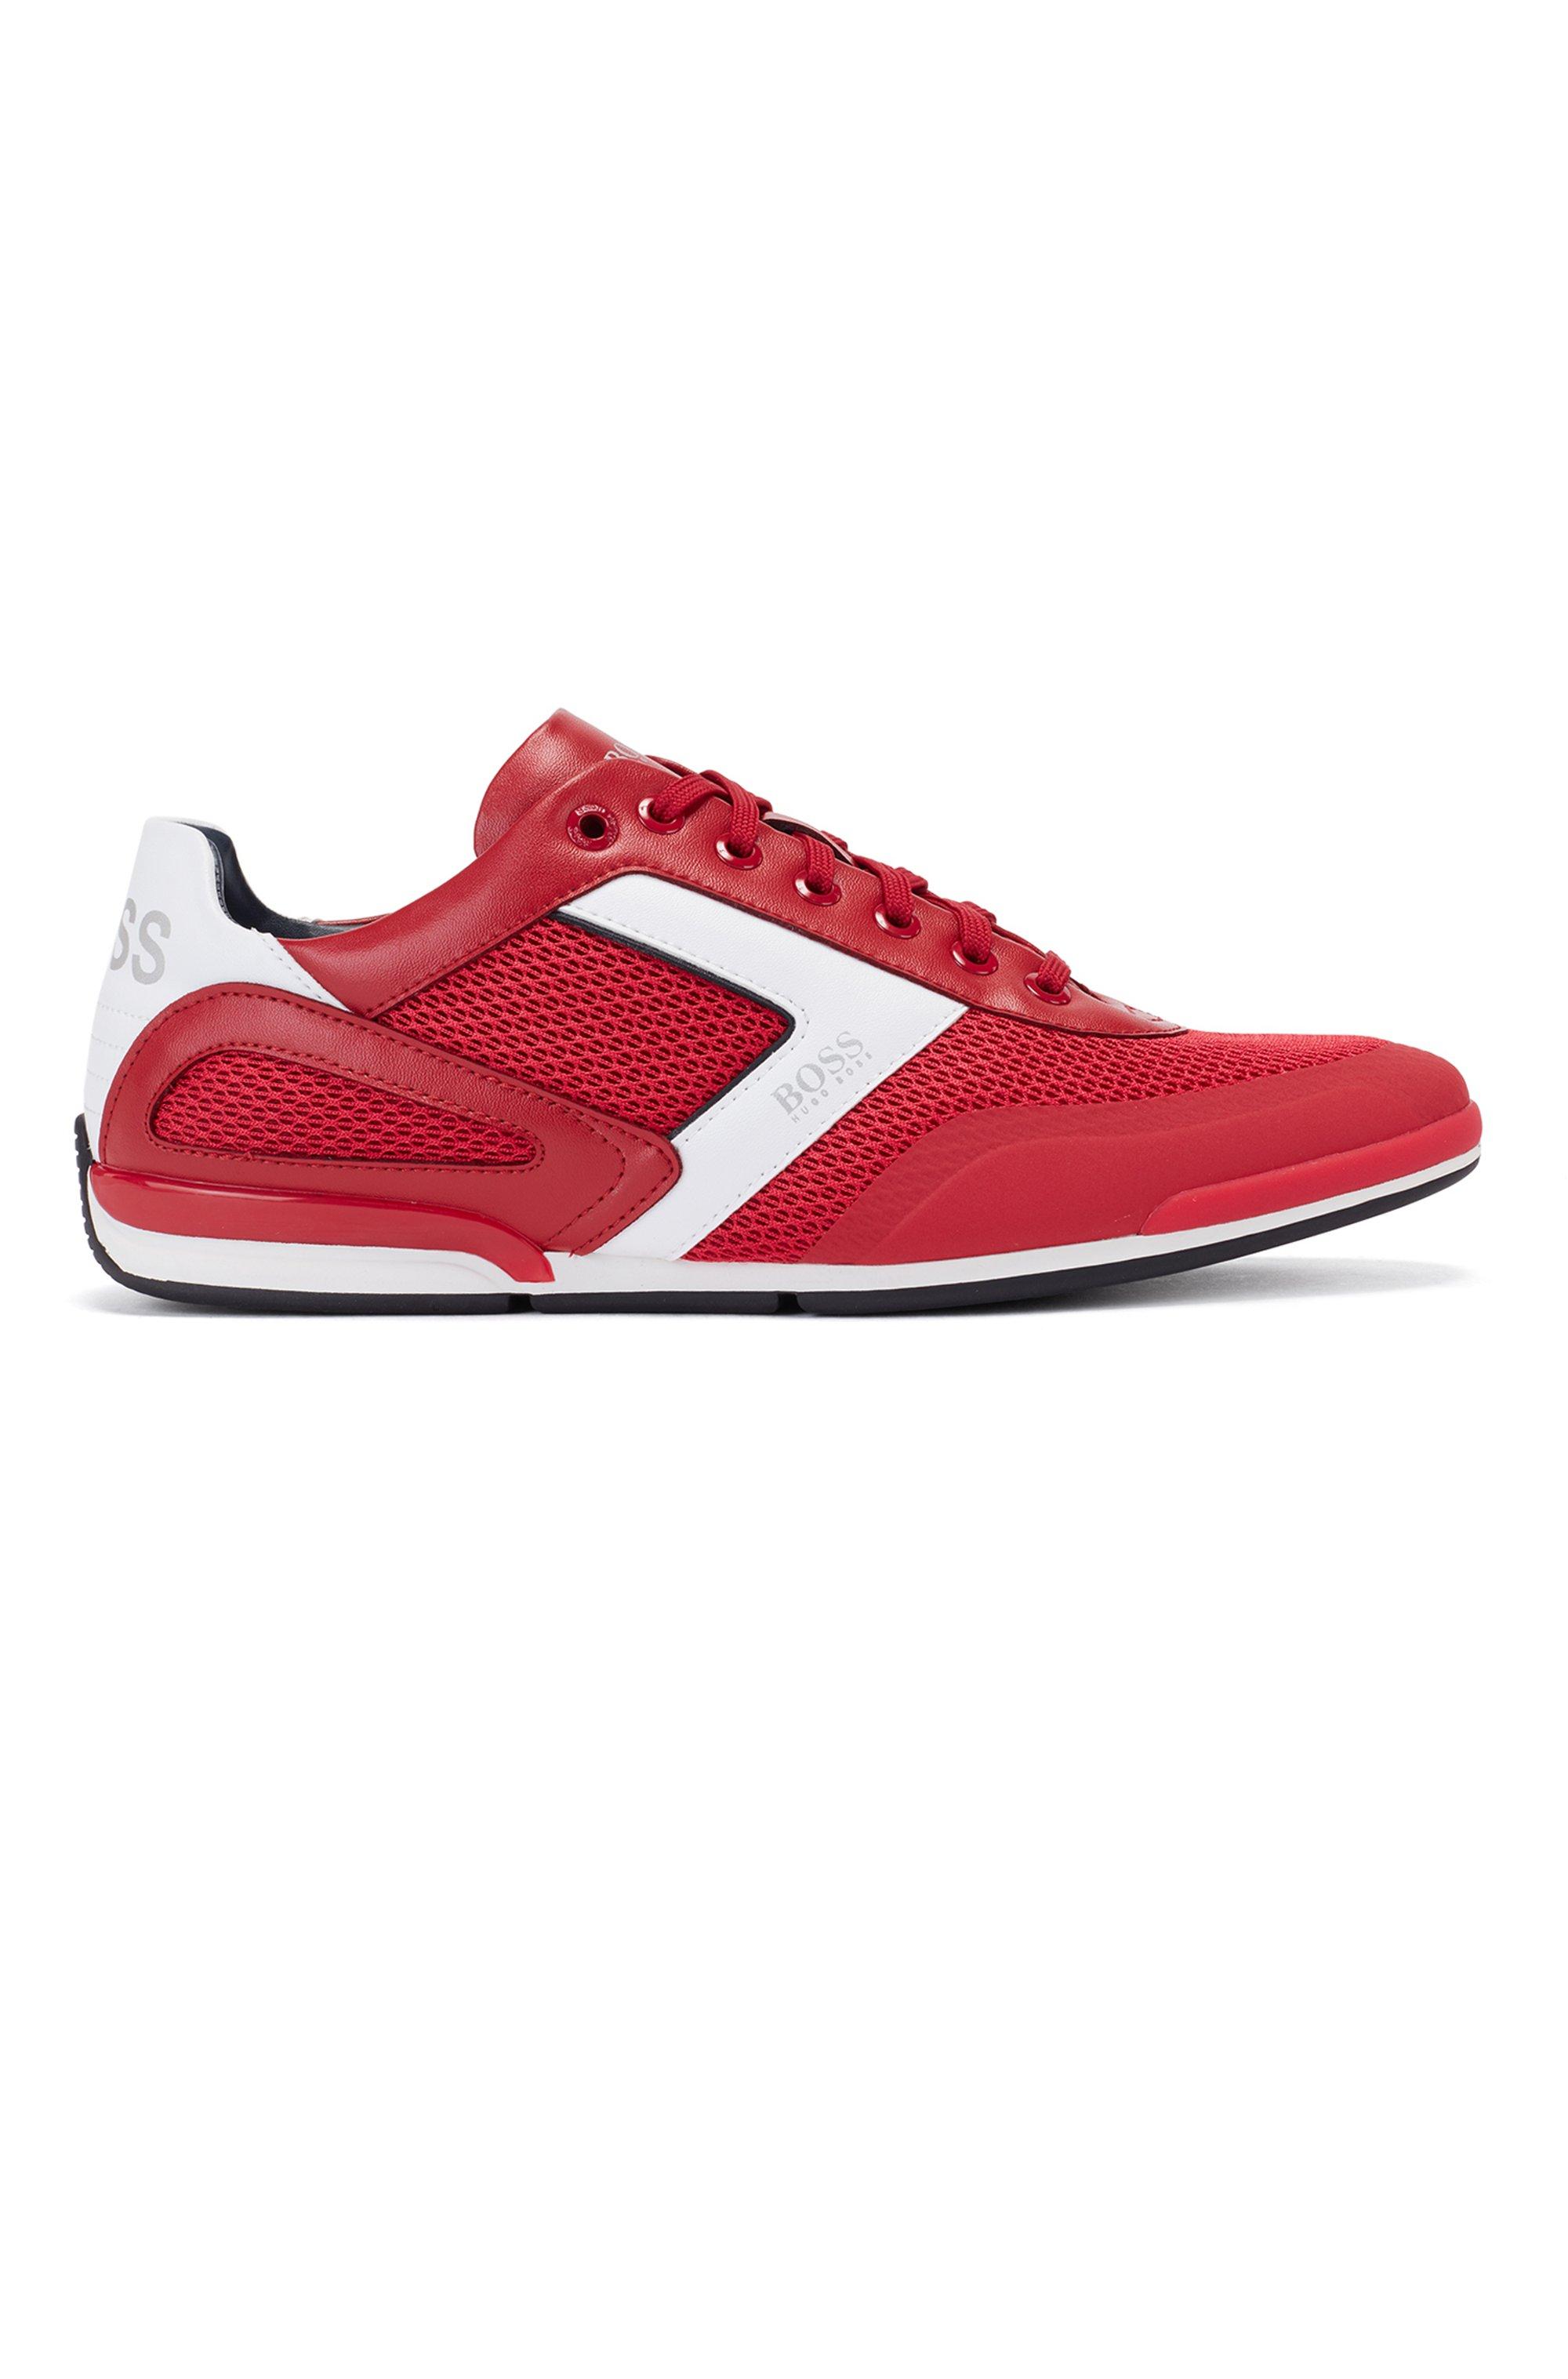 thick egg Scold hugo boss red mens shoes Percentage Ruckus Sickness